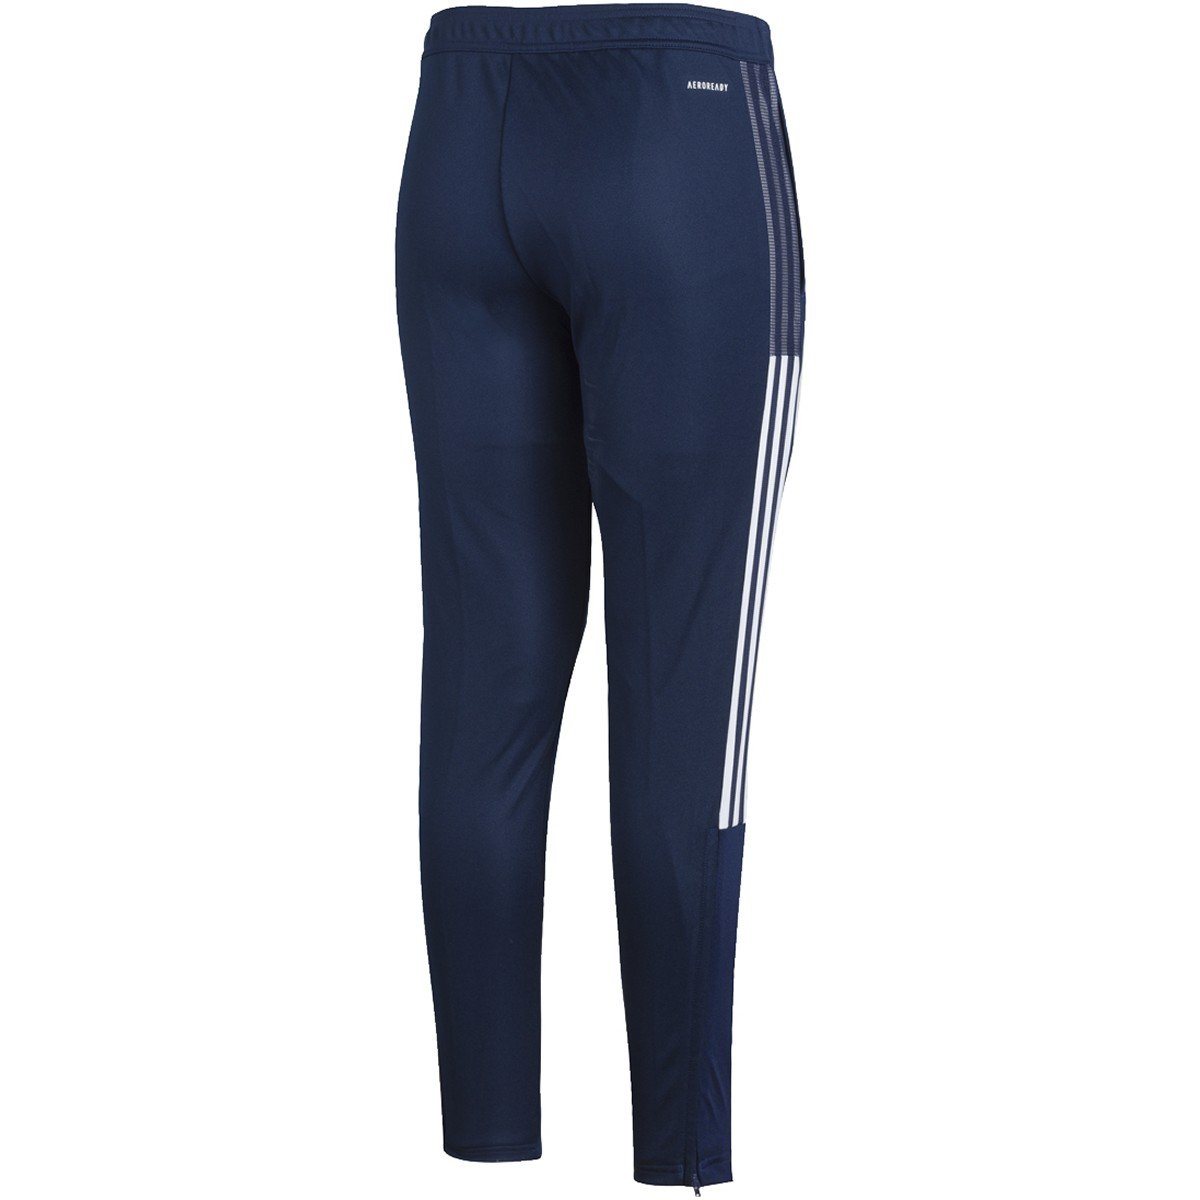 Adidas women pants for Comfort and Style插图4